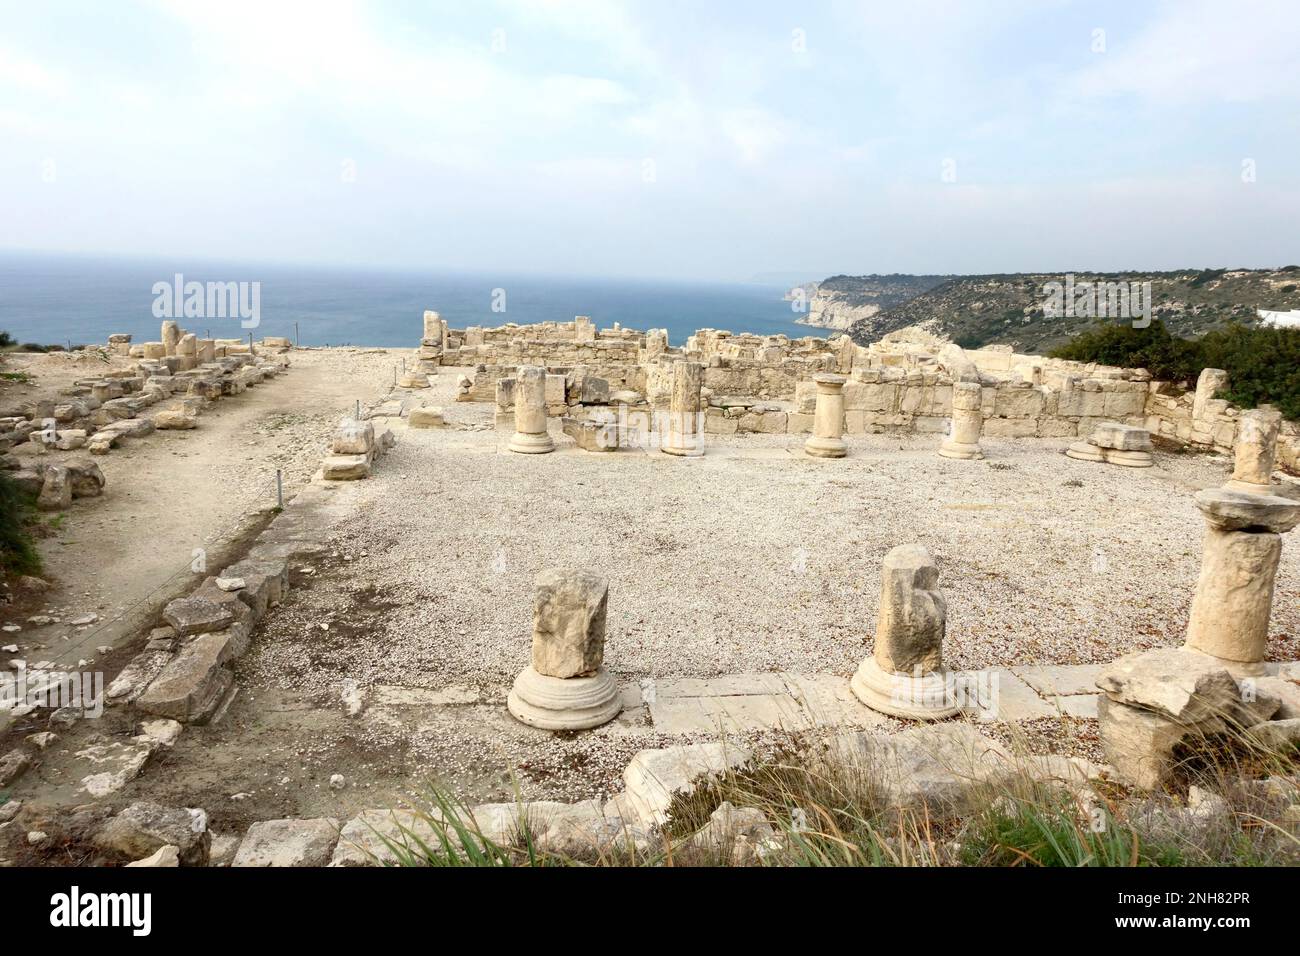 A row of columns left from an ancient Greek temple. The ruins of the building of an ancient civilization in the Paphos area. Nea Paphos and Paphos Arc Stock Photo